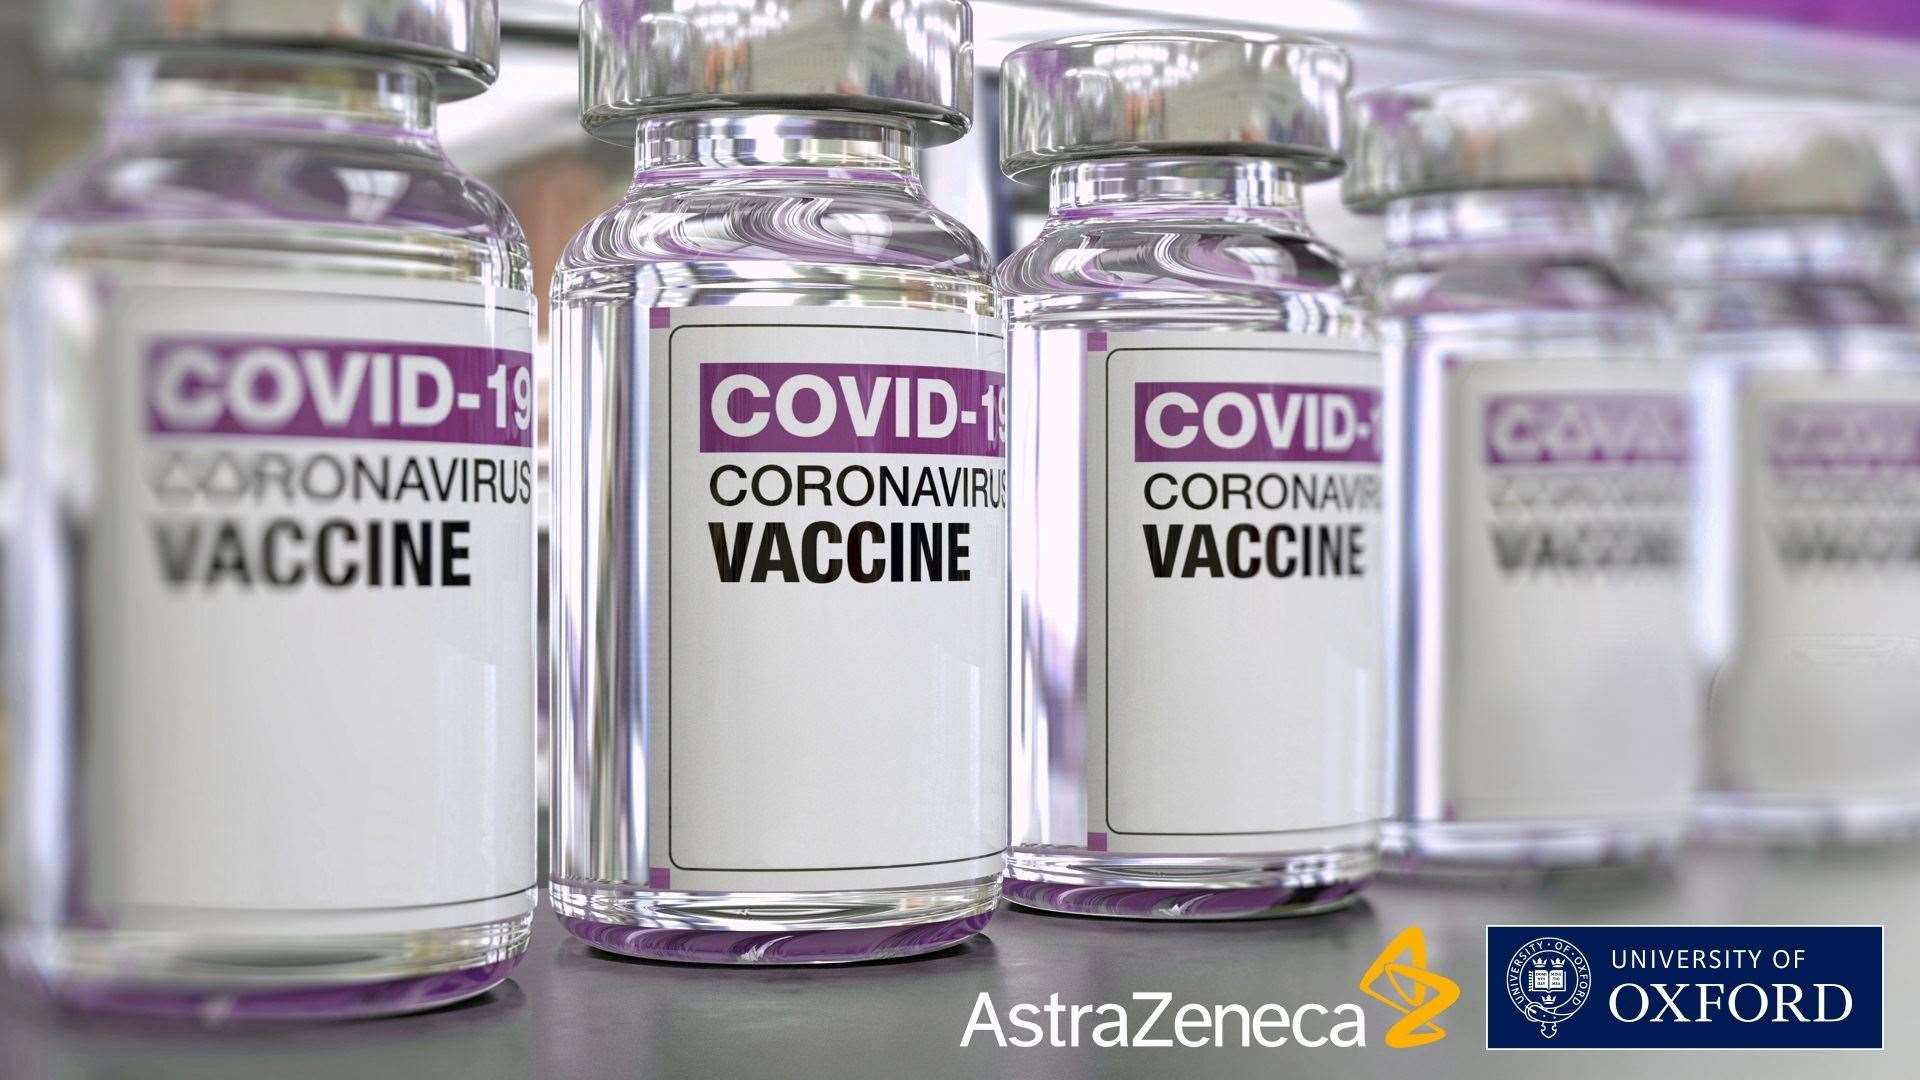 The approval of the Oxford/AstraZeneca vaccine will greatly speed up the roll-out of jabs. Picture: AstraZeneca